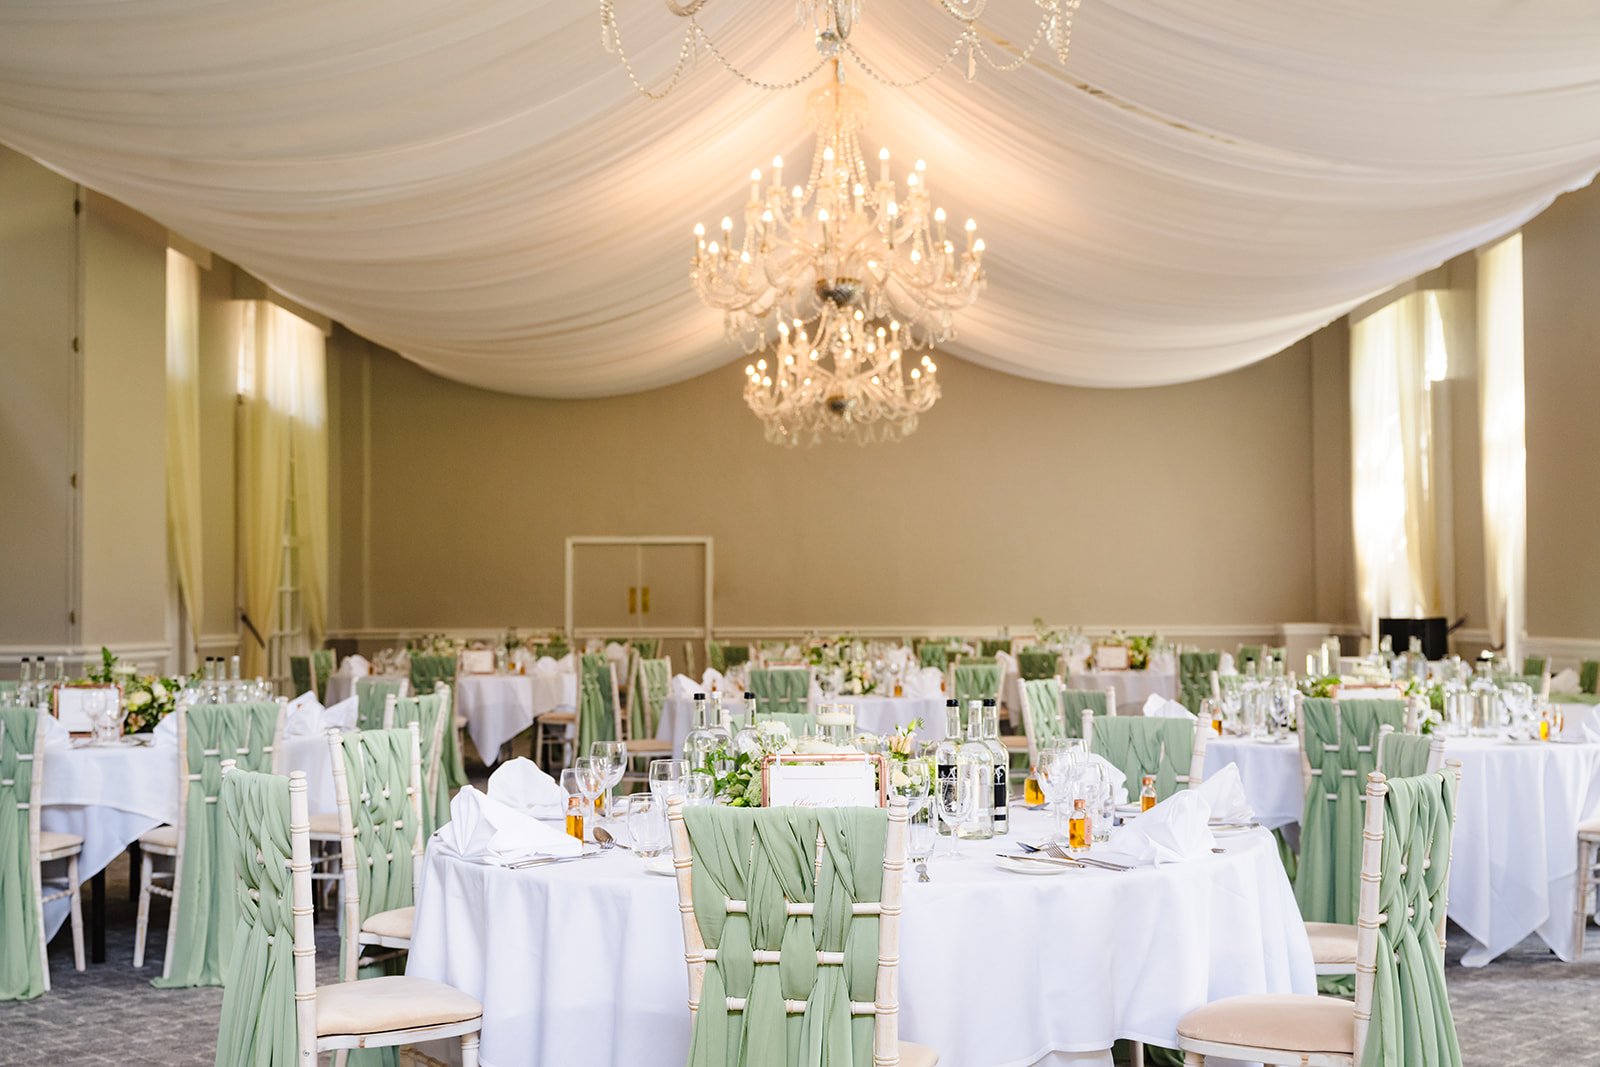 The ballroom at stapleford park styled for a wedding by Amanda Forman Photography